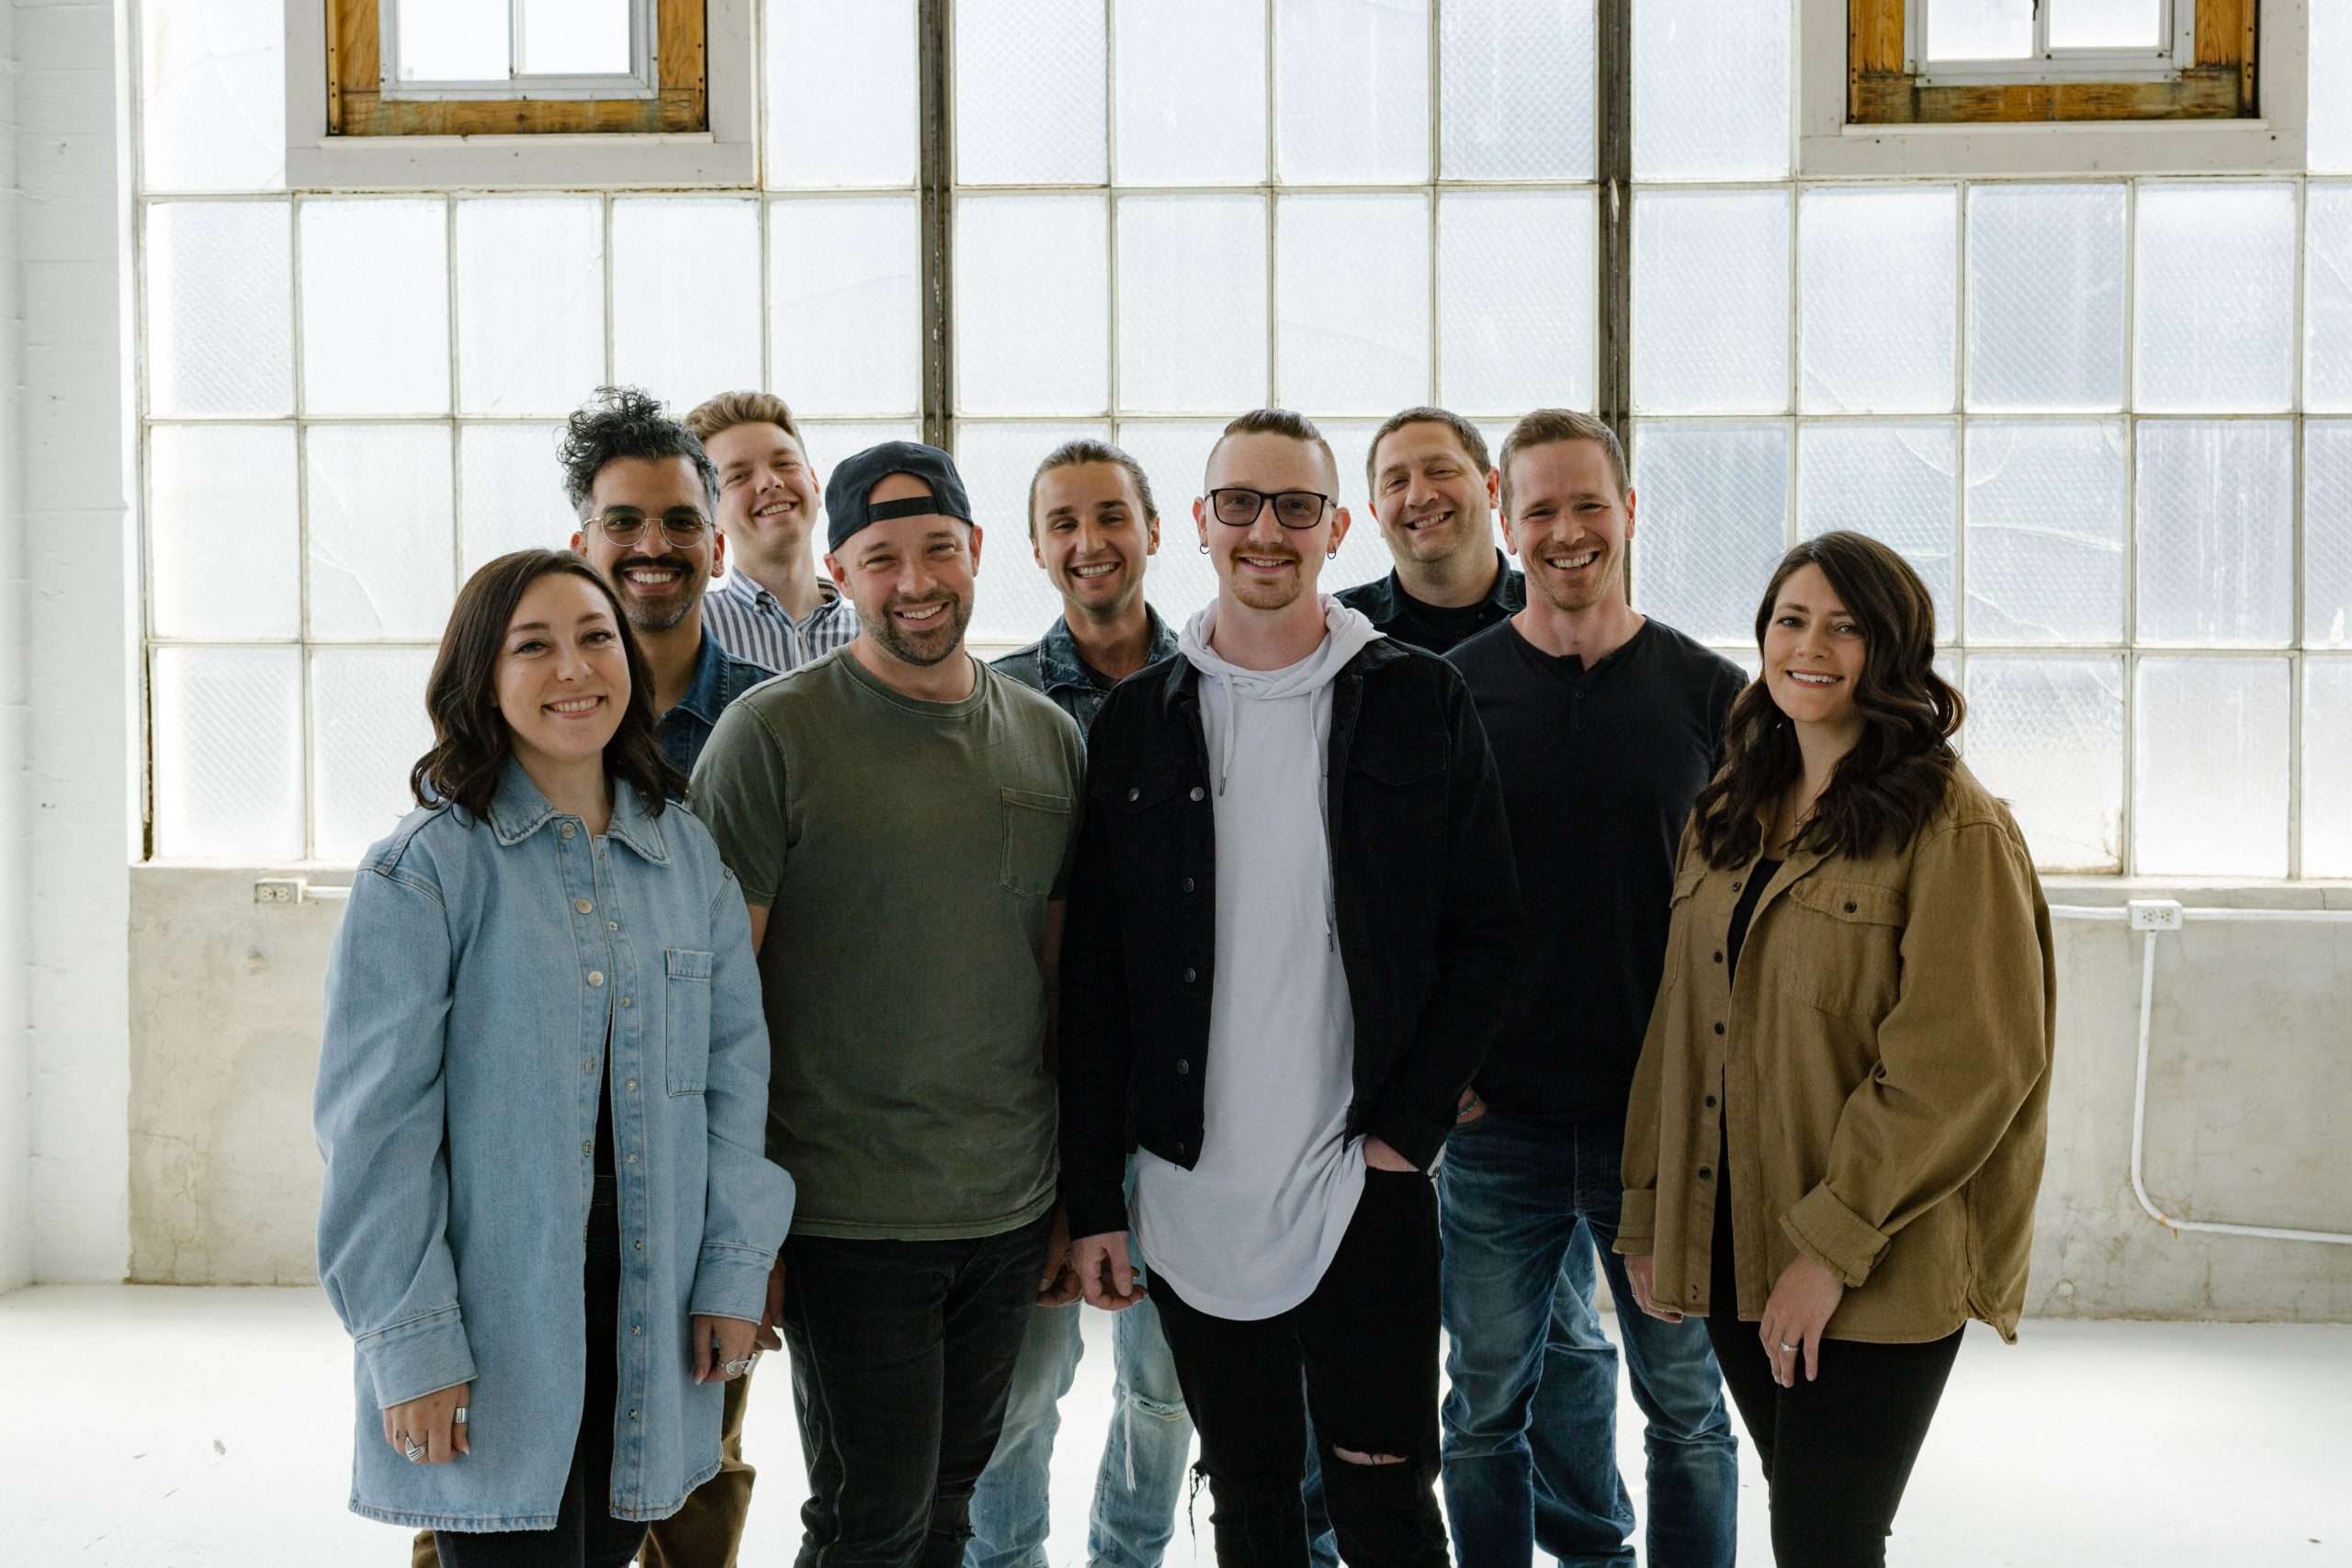 Canyon Hills Worship releases new song 'Heart Cries Holy'